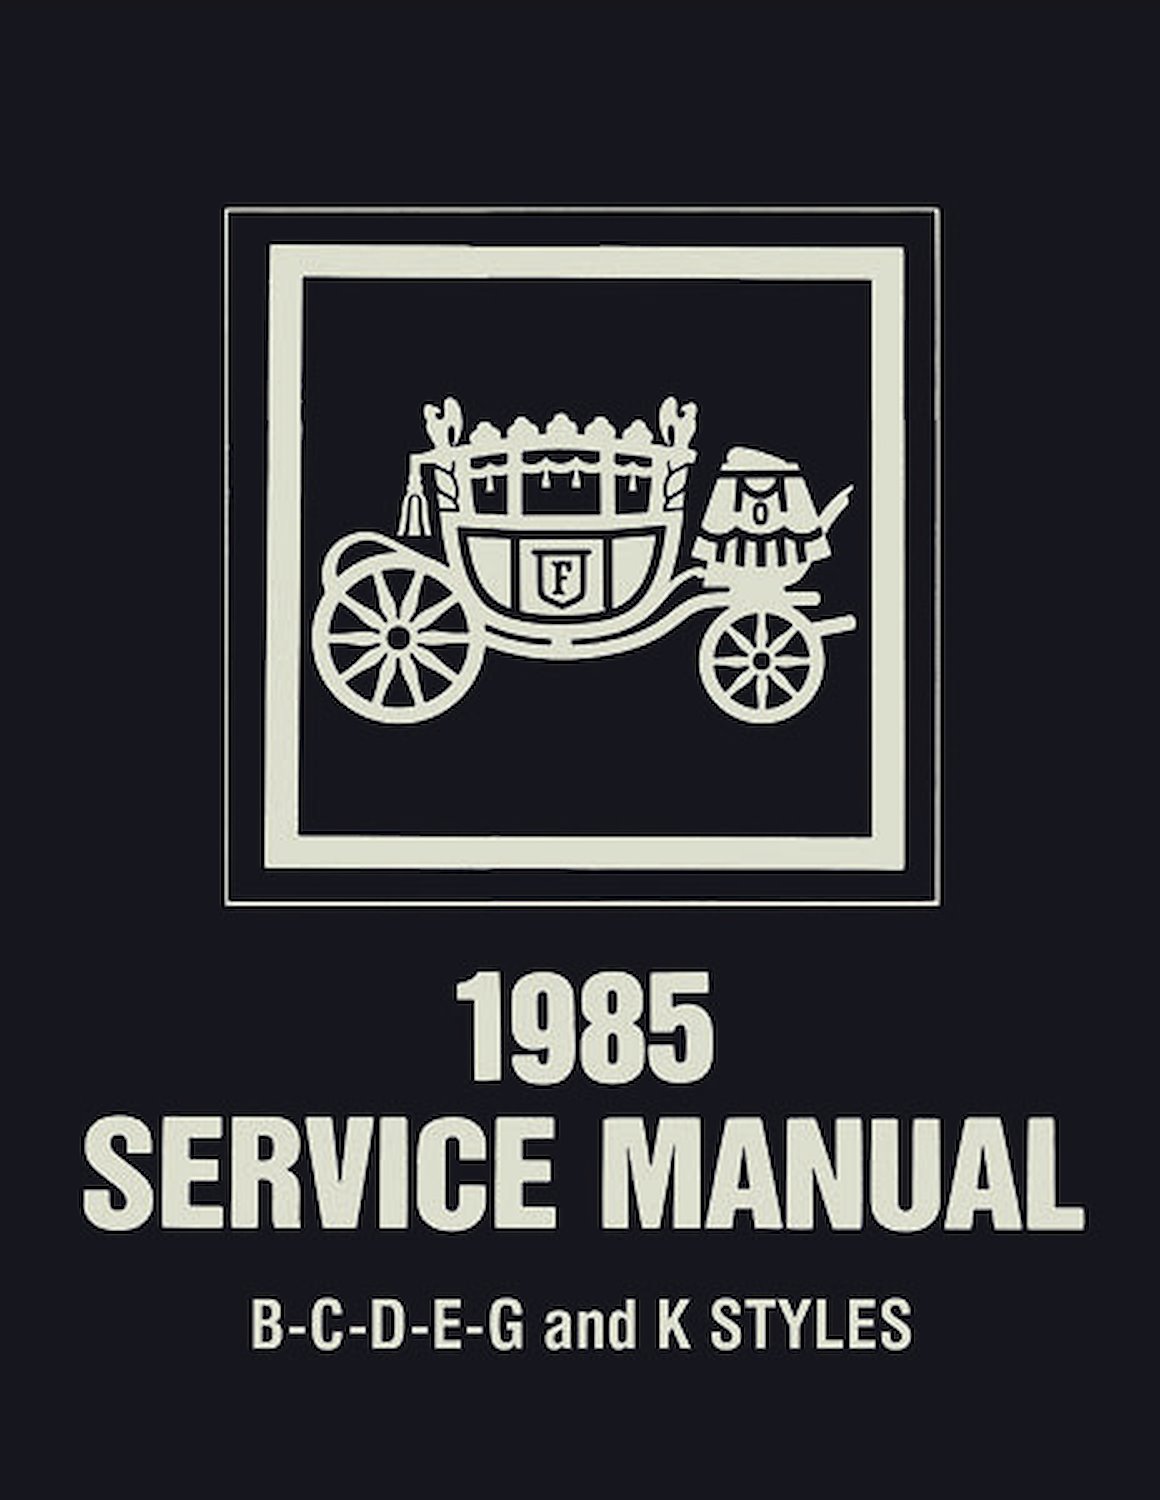 Fisher Body Service Manual for 1985 Buick, Cadillac, Chevrolet, GMC, Oldsmobile and Pontiac Models, B-C-D-E-G-K Body Styles